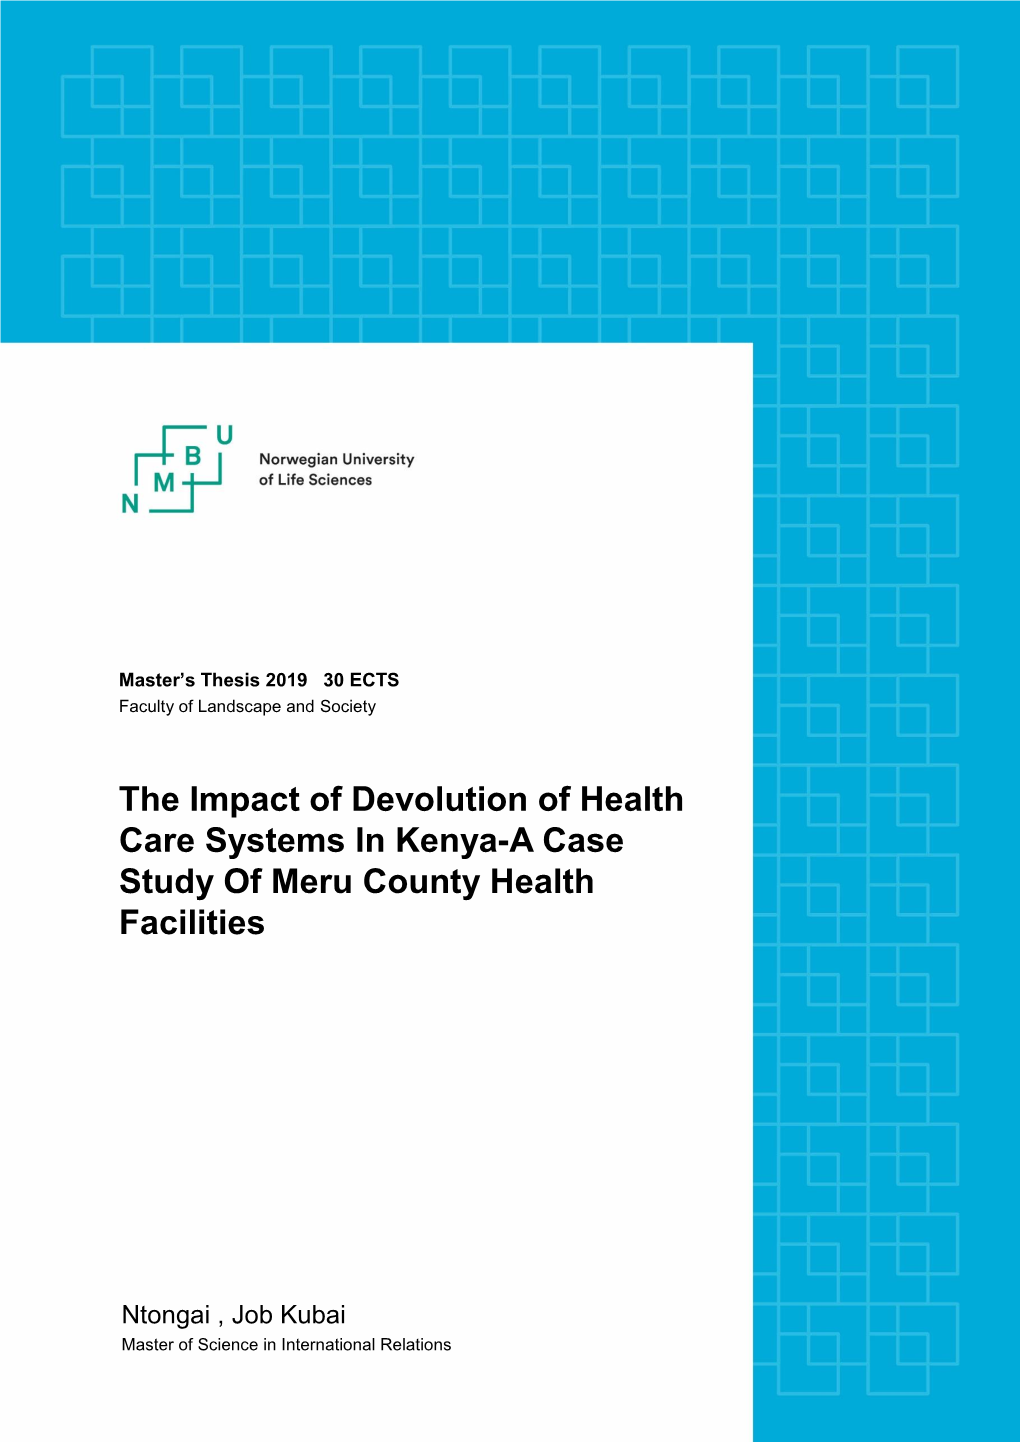 The Impact of Devolution of Health Care Systems in Kenya-A Case Study of Meru County Health Facilities